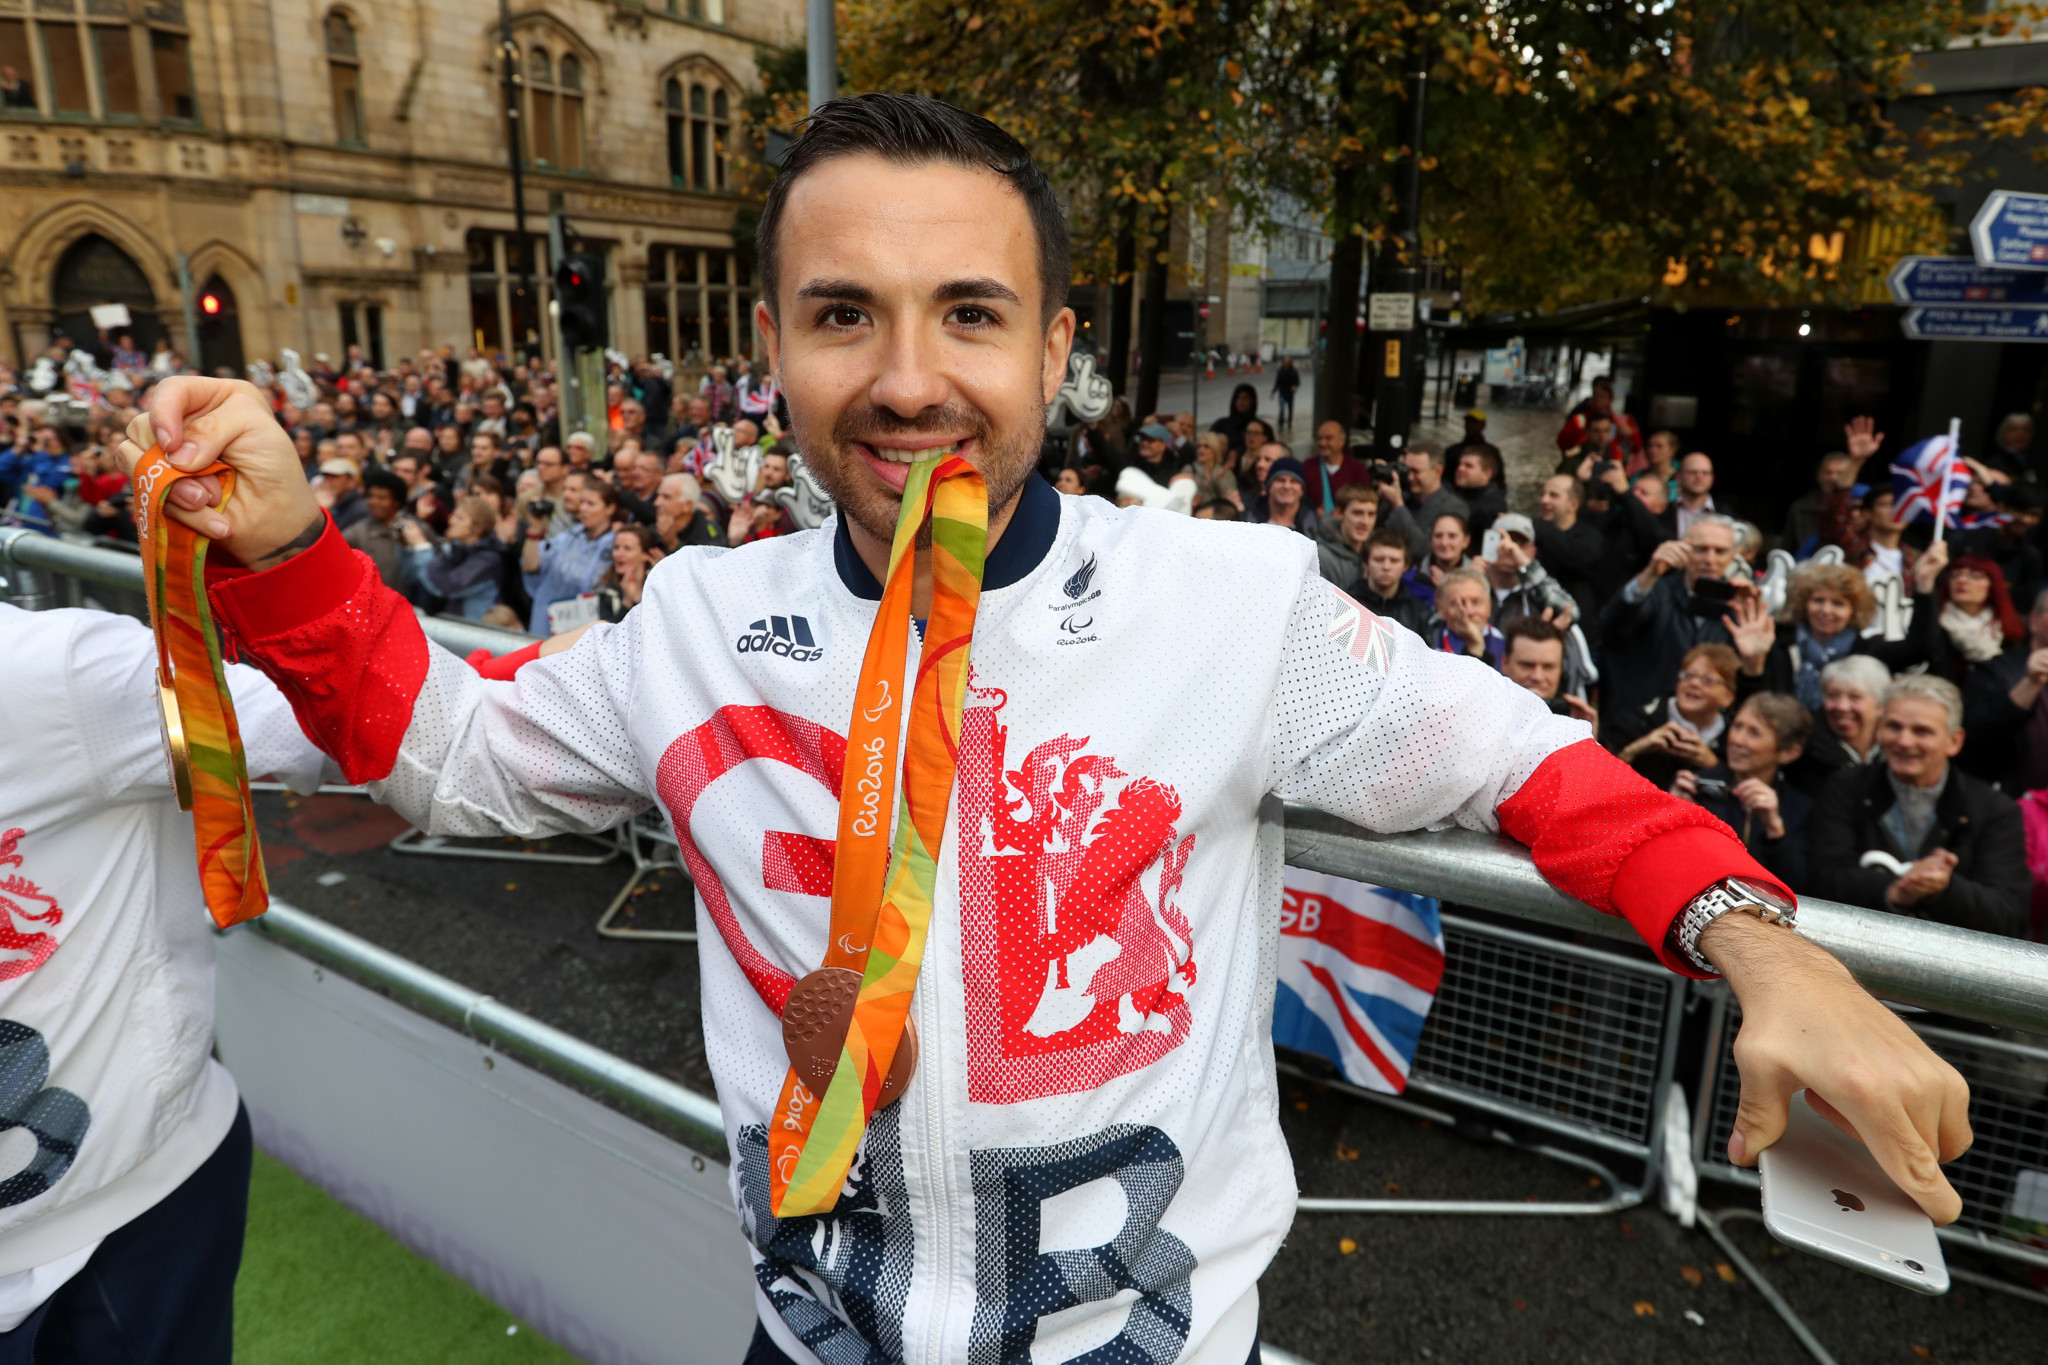 Paralympic gold medallist Will Bayley has signed up for BBC reality show Strictly Come Dancing ©Getty Images